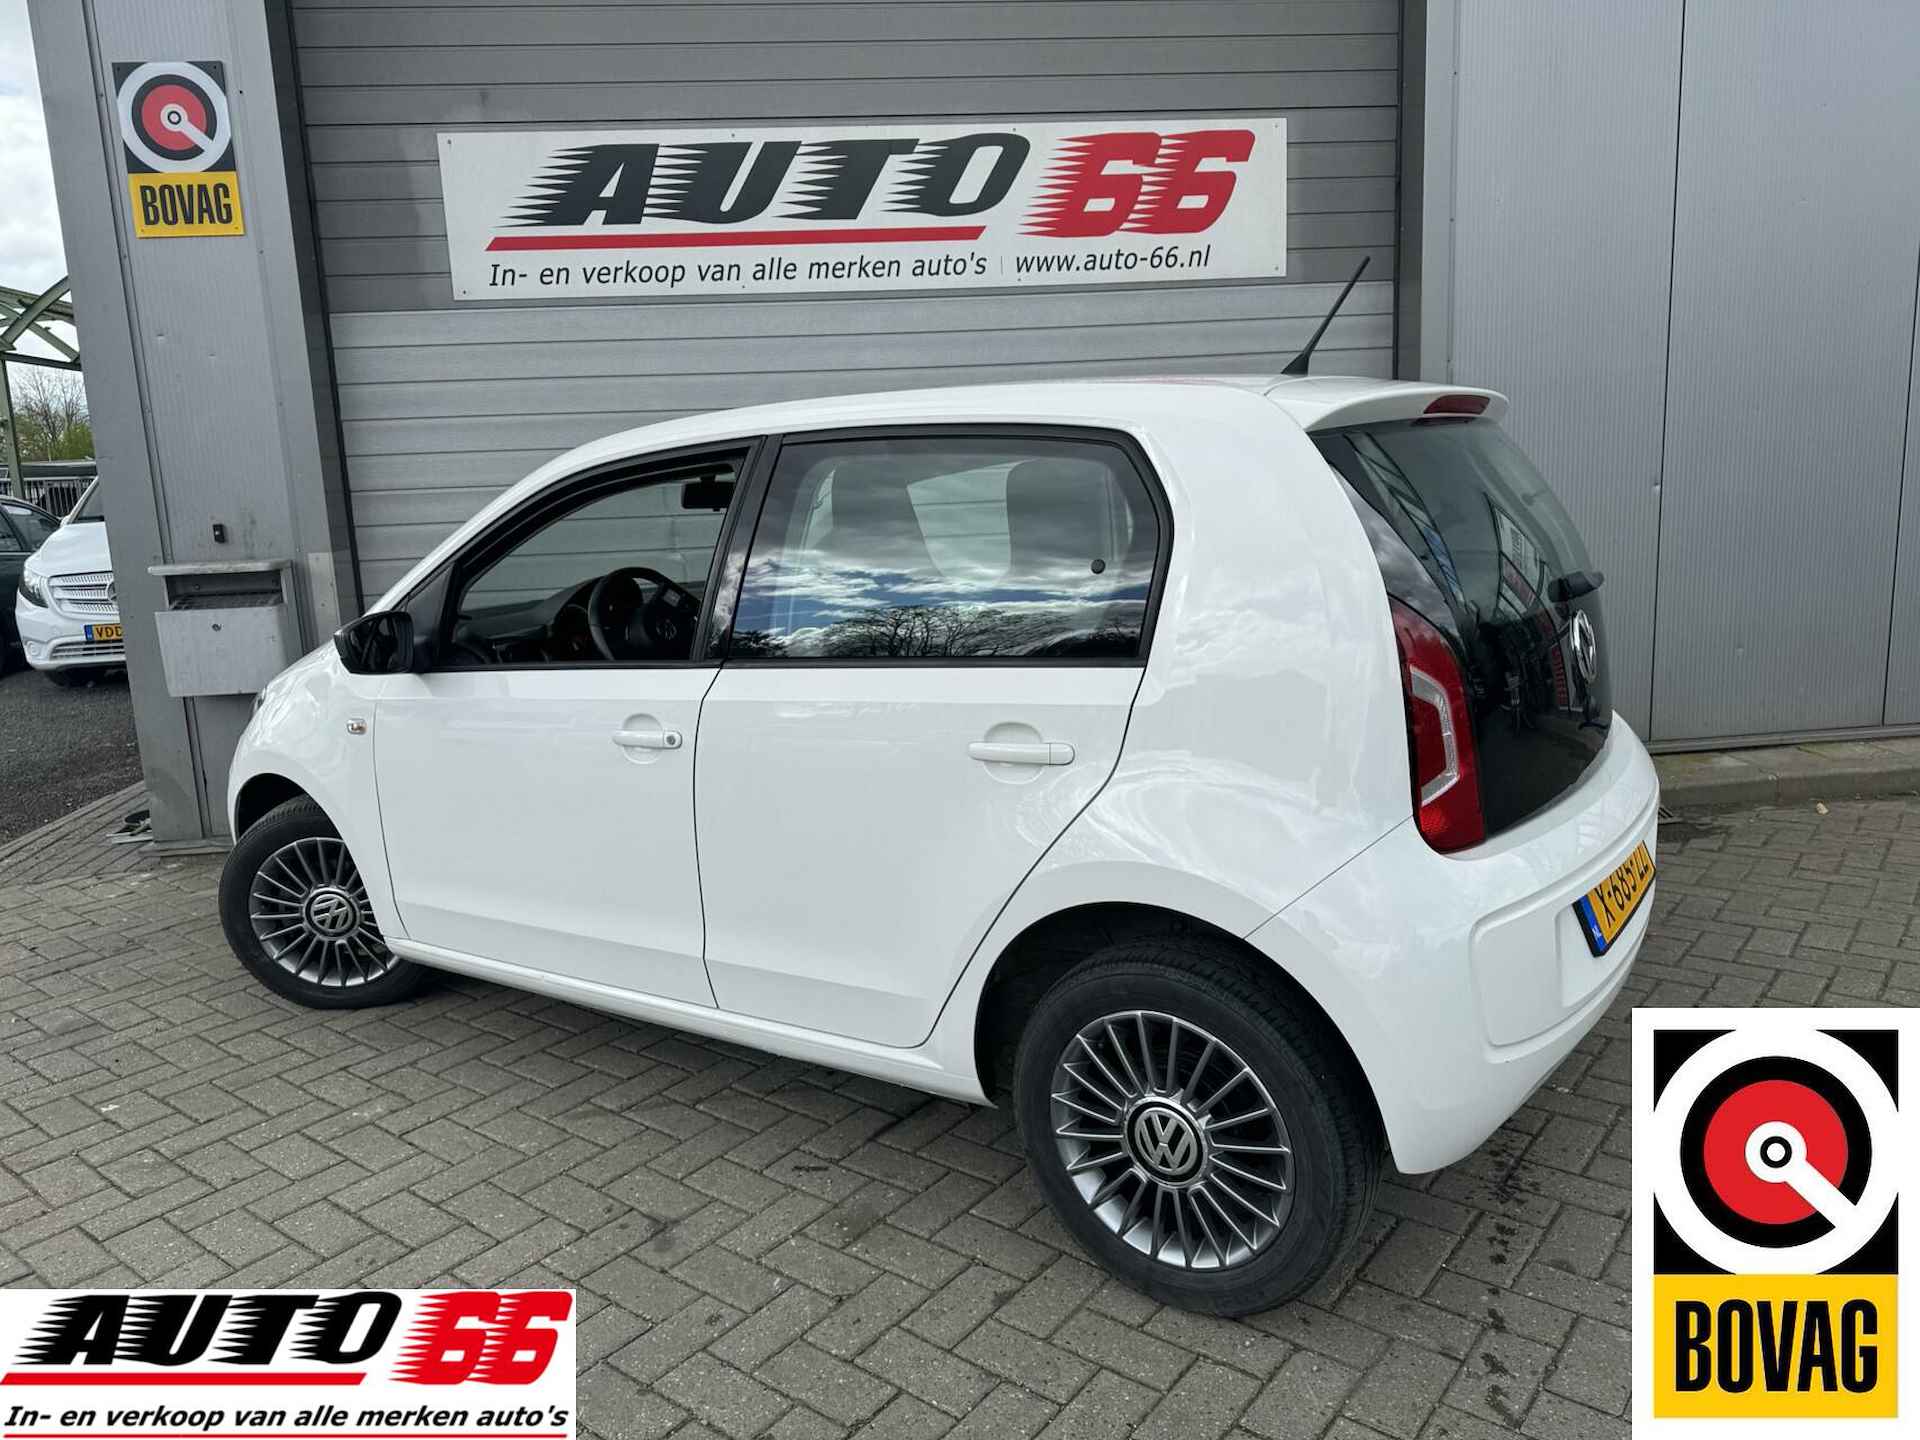 Volkswagen Up! 1.0 cheer BlueMotion 5 drs AIRCO APK tot 2025 - 4/18